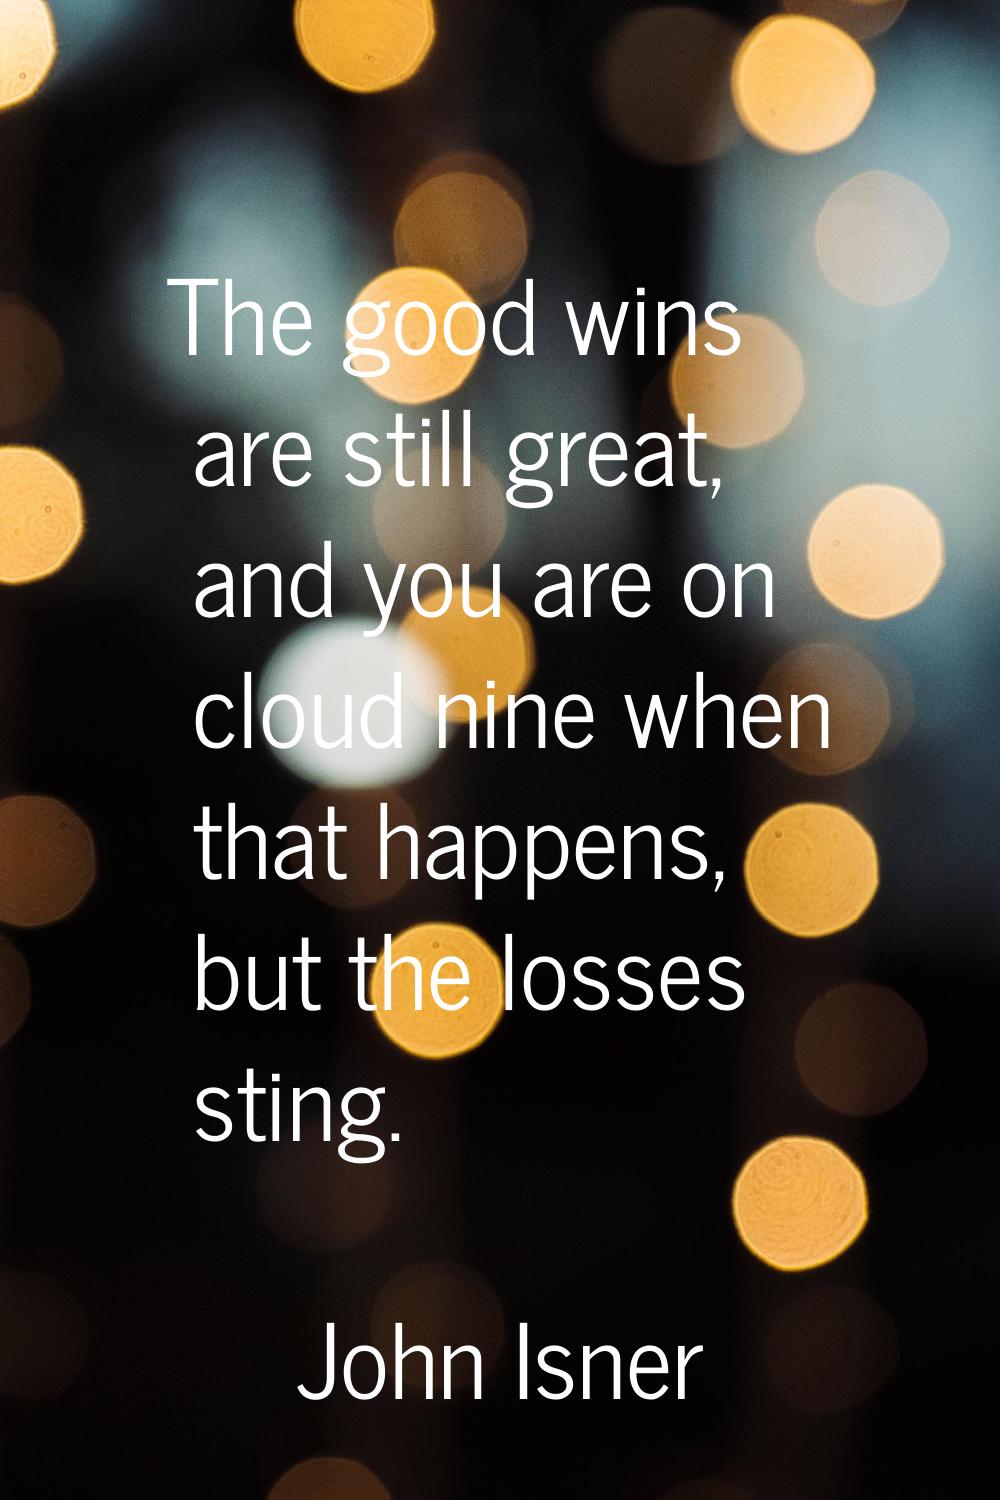 The good wins are still great, and you are on cloud nine when that happens, but the losses sting.